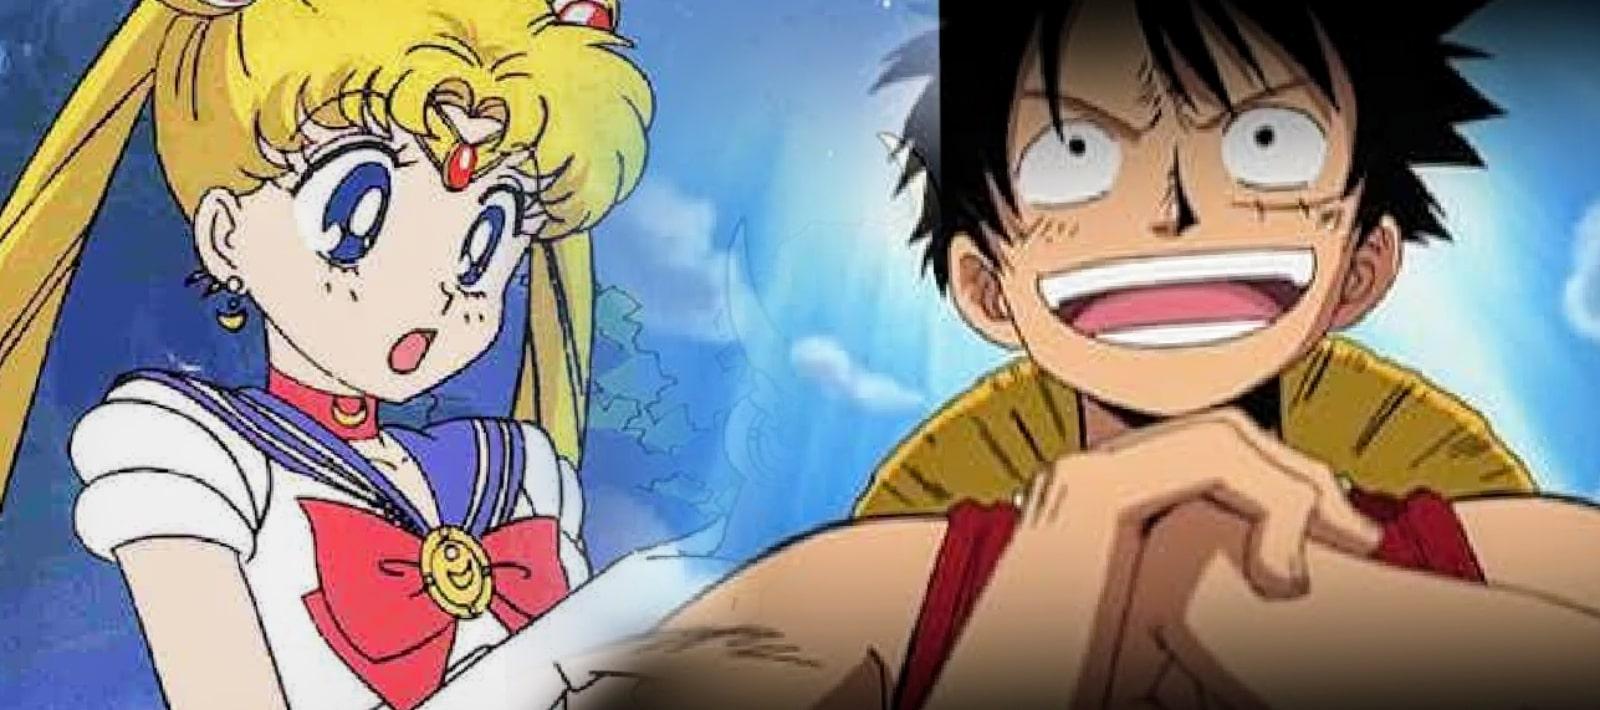 Sailor Moon and One Piece's Monkey D. Luffy